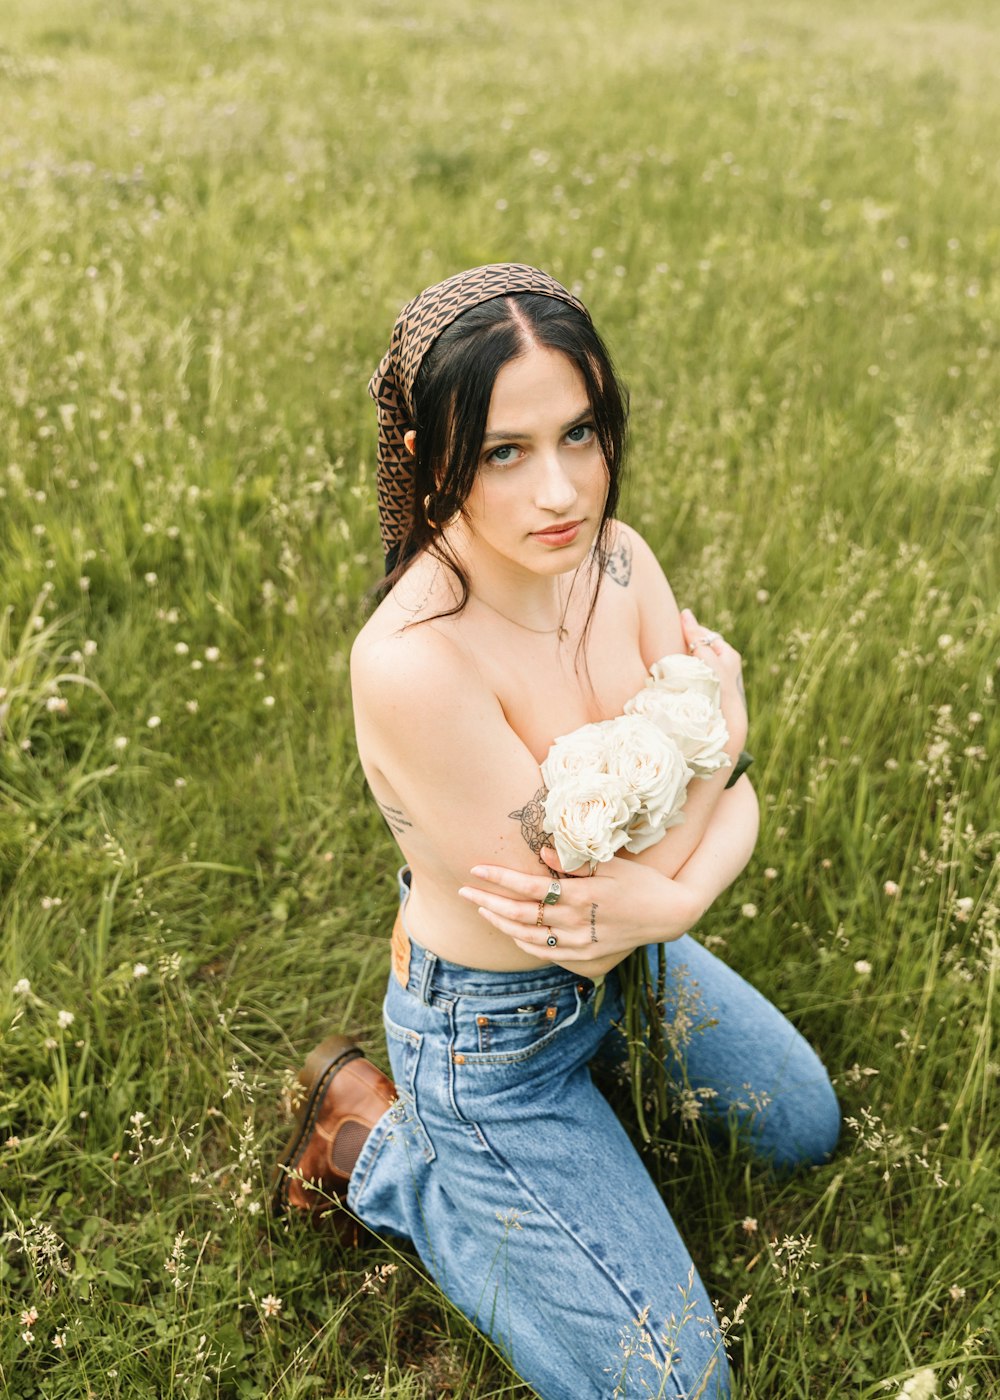 a shirtless woman sitting in a field holding a flower